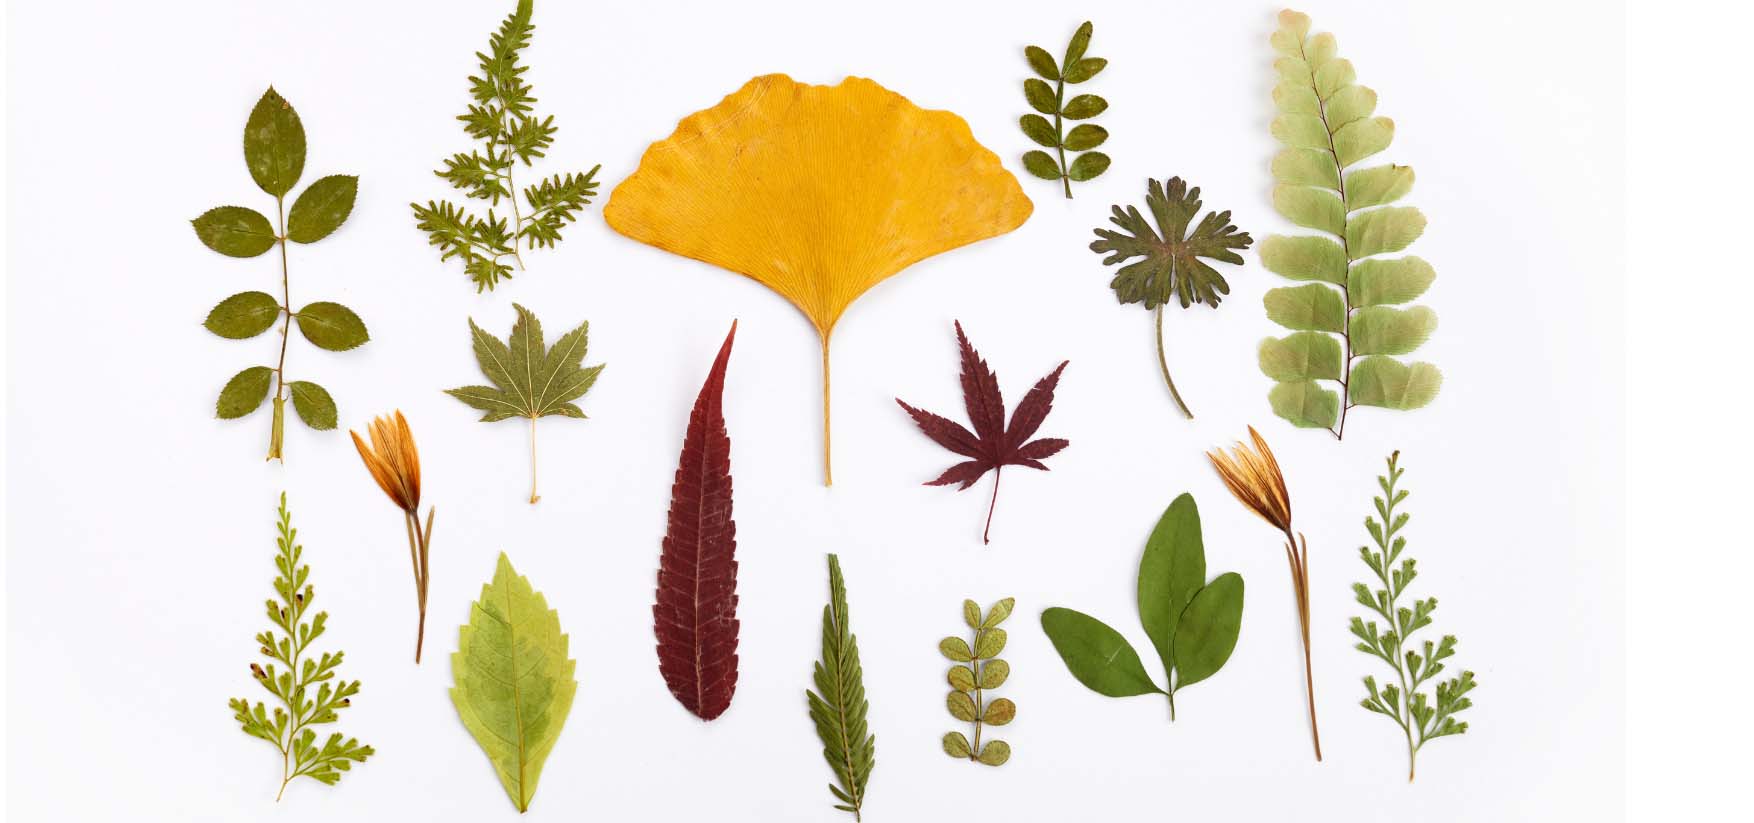 Collection of pressed leaves displayed artfully.